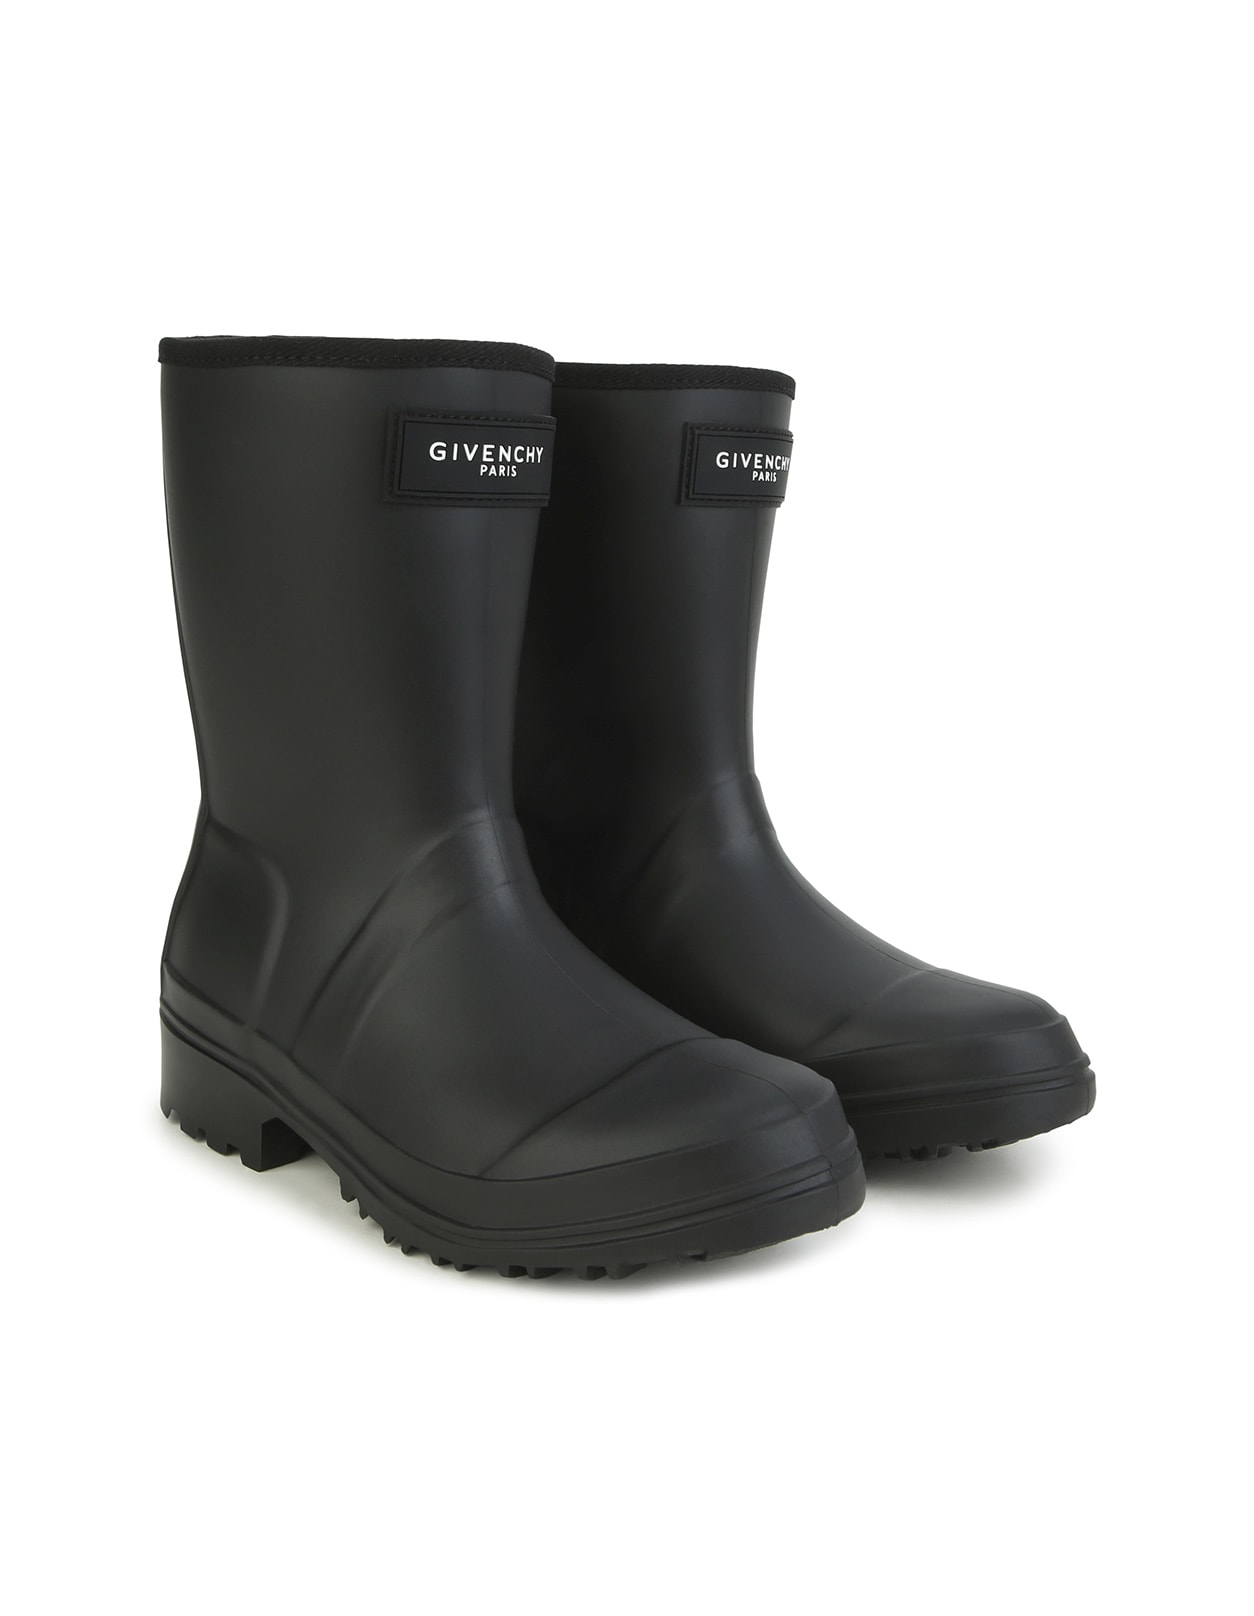 GIVENCHY GIVENCHY 4G RAIN BOOTS IN BLACK